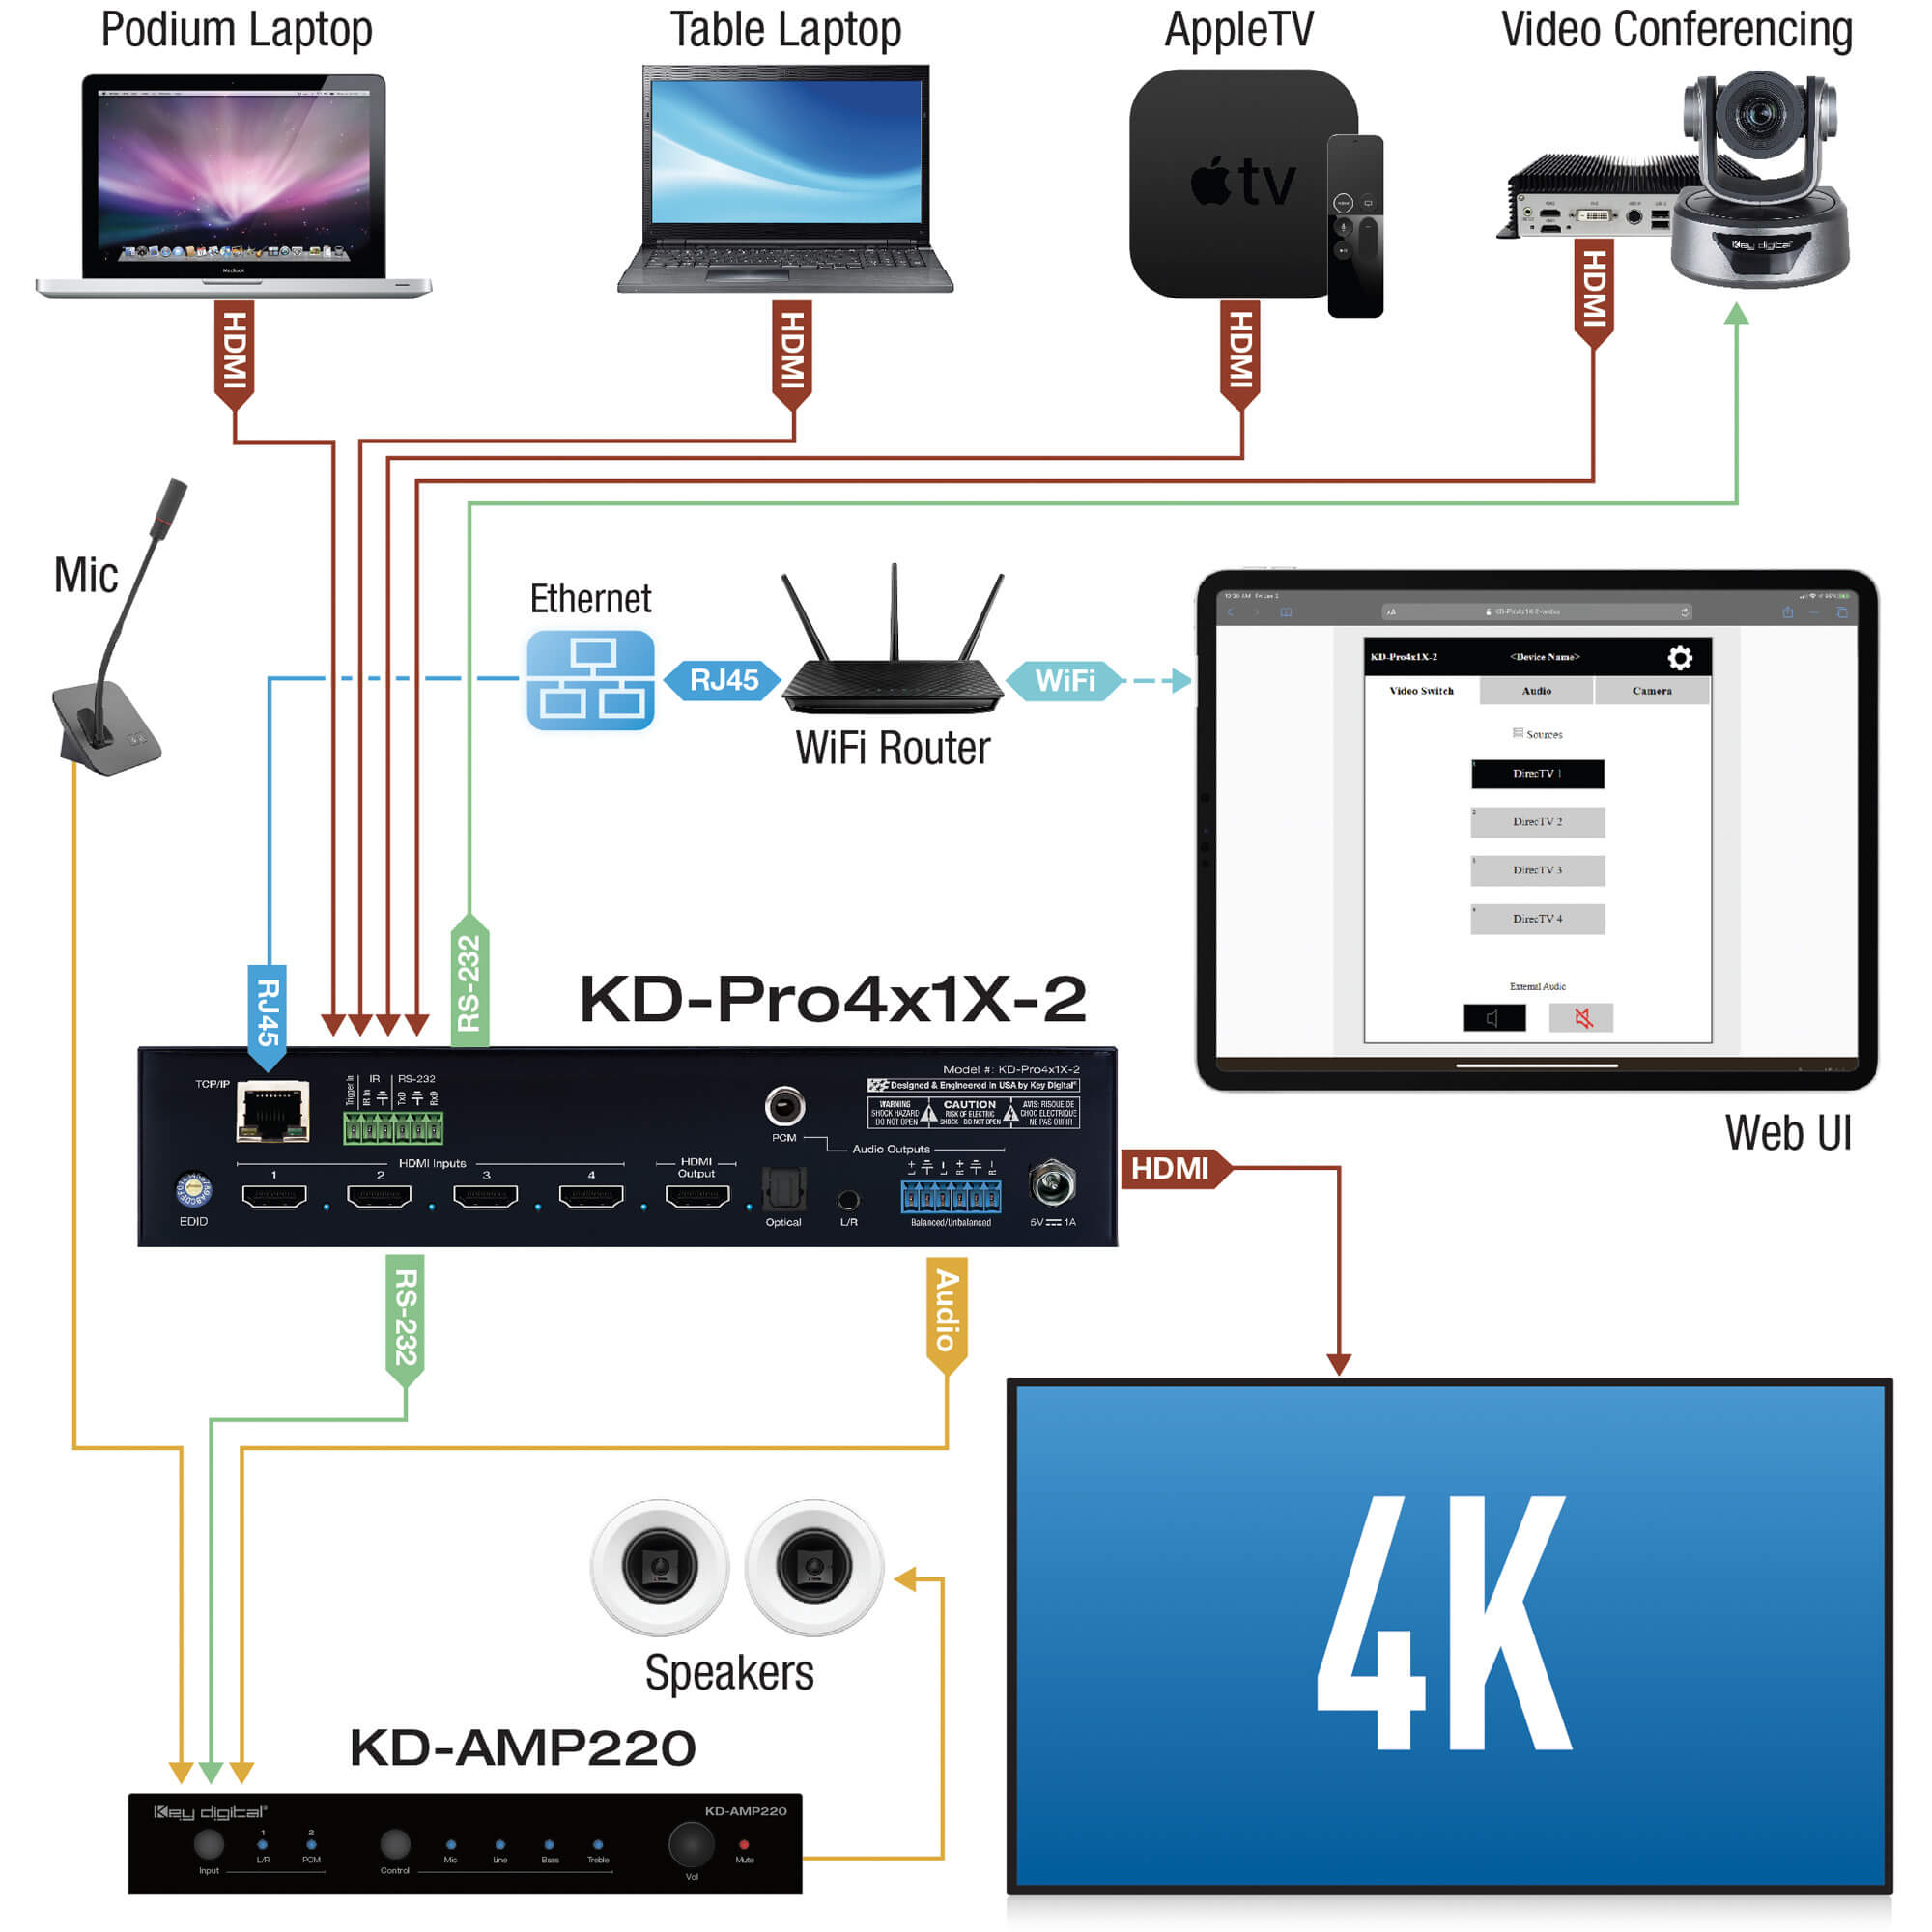 Thumbnail of KD-Pro4x1X-2  Example System